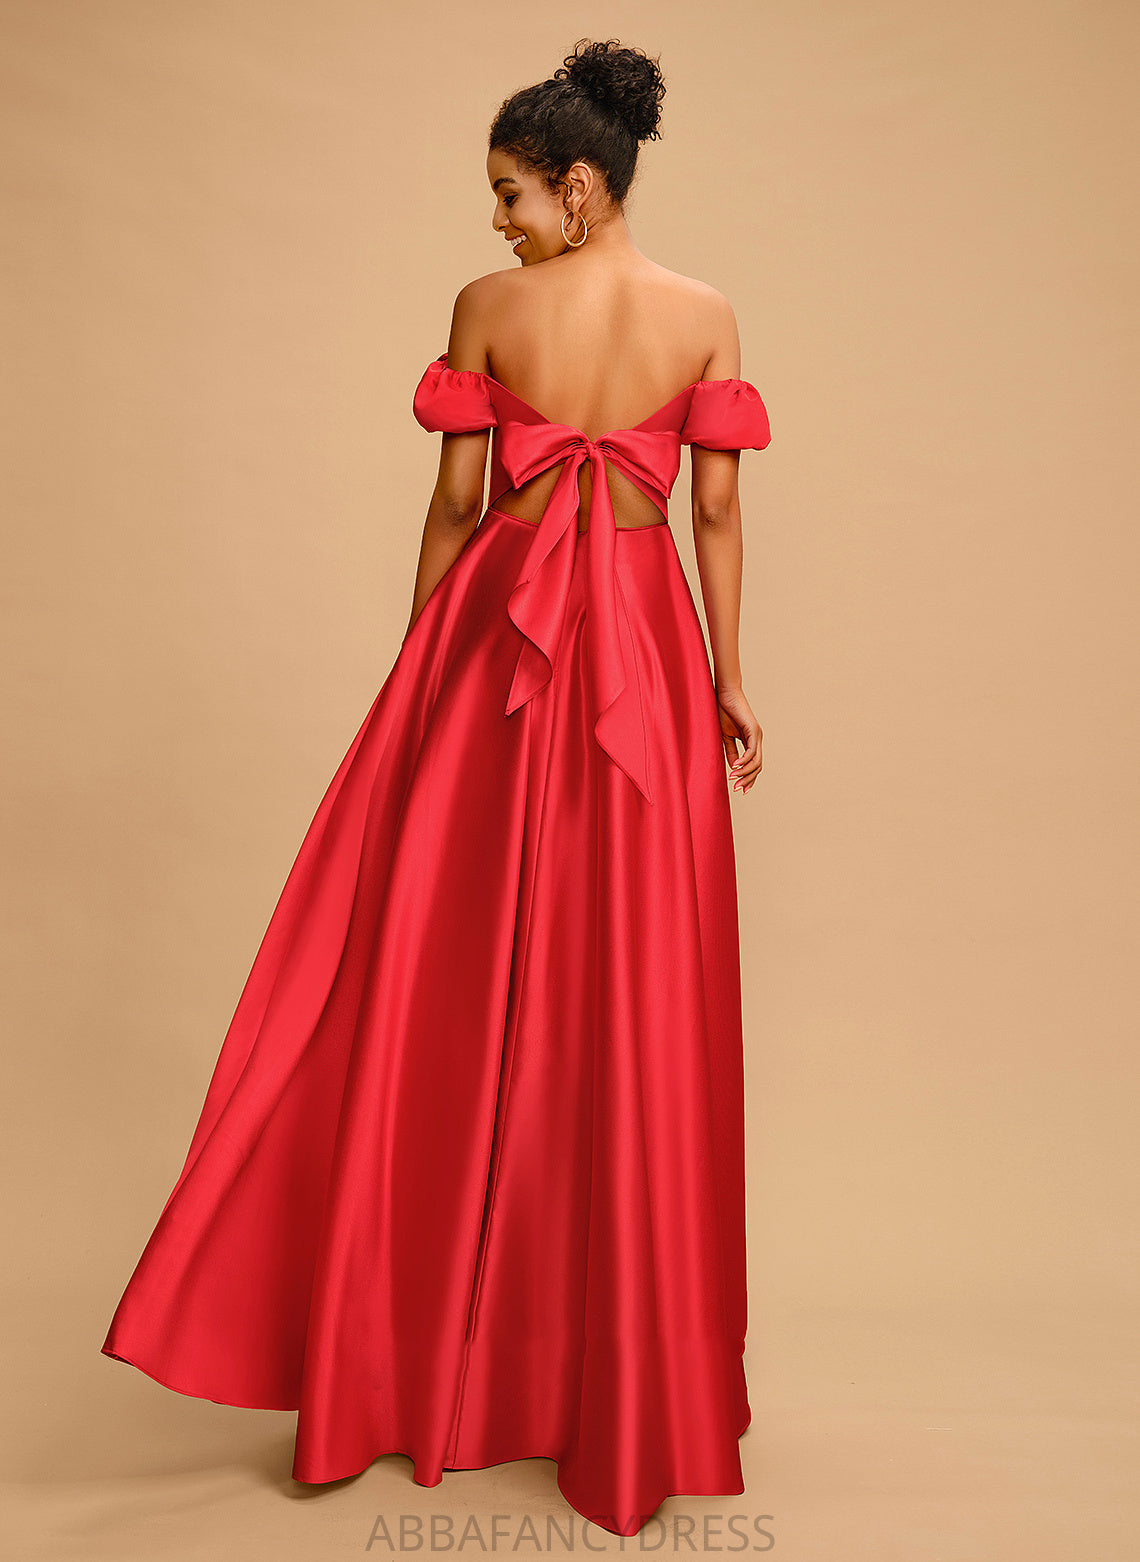 Bow(s) Ball-Gown/Princess Floor-Length Damaris With Satin Off-the-Shoulder Sweetheart Prom Dresses